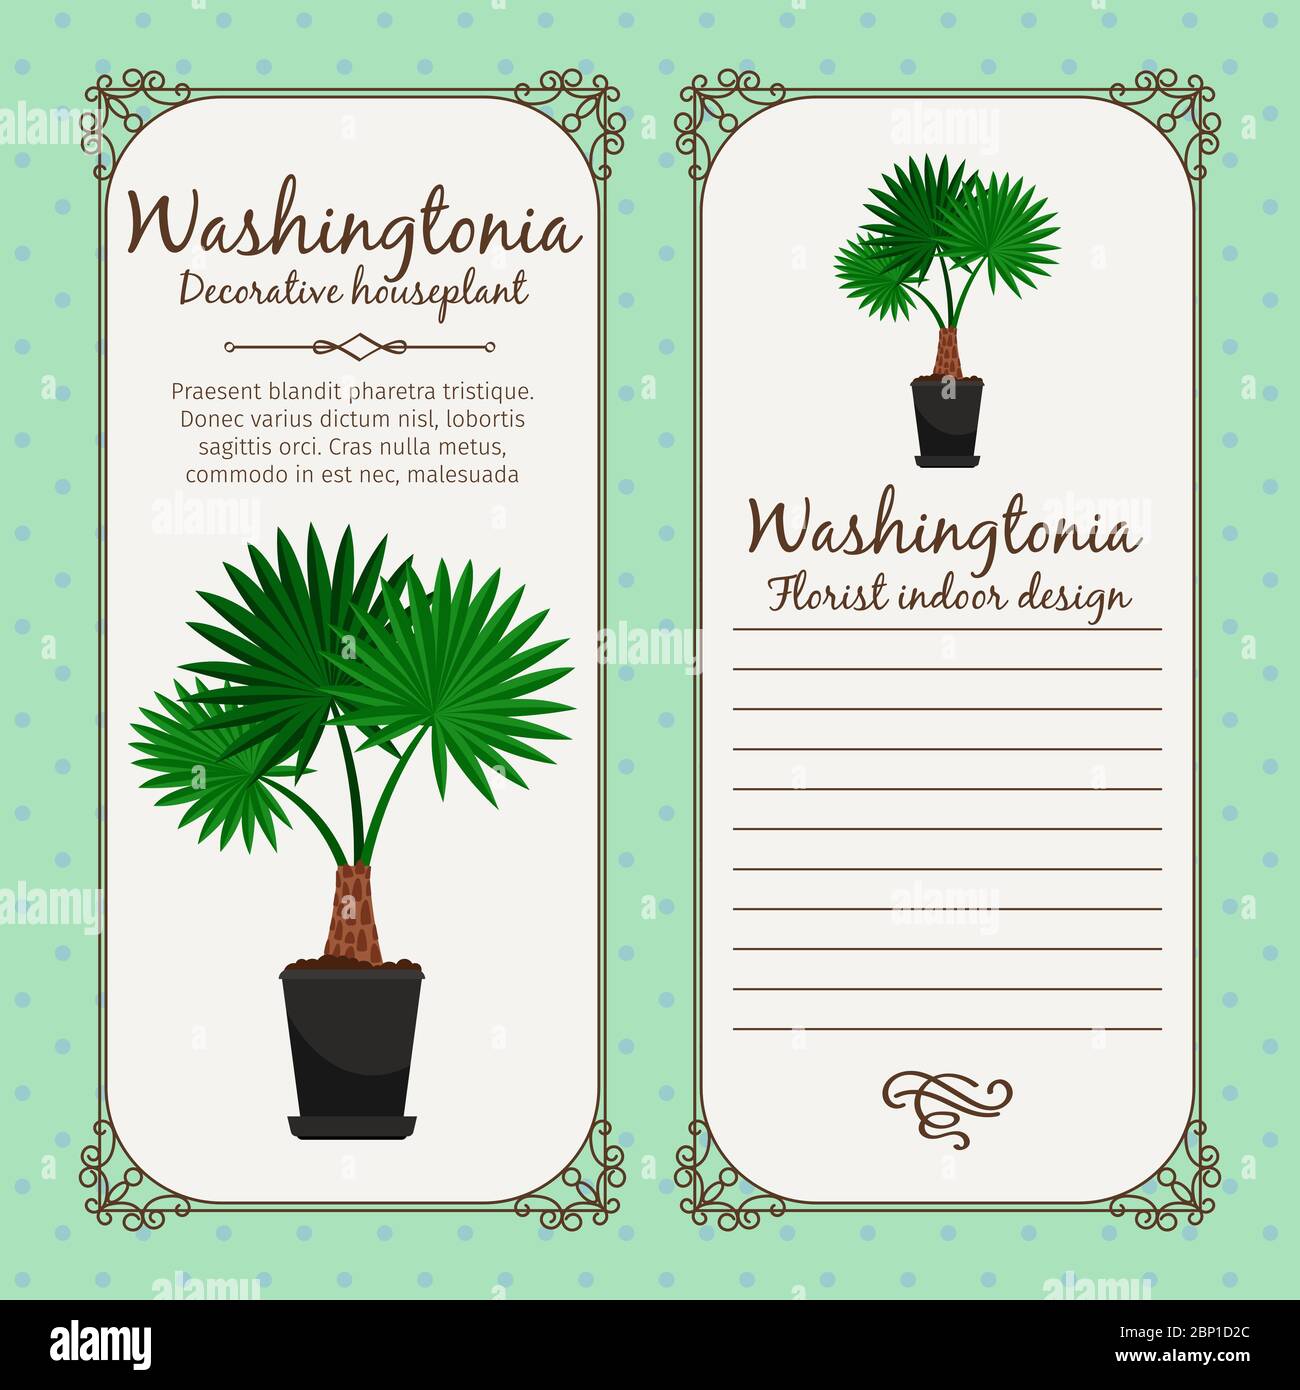 Vintage label template with decorative washingtonia plant in pot, vector illustration Stock Vector